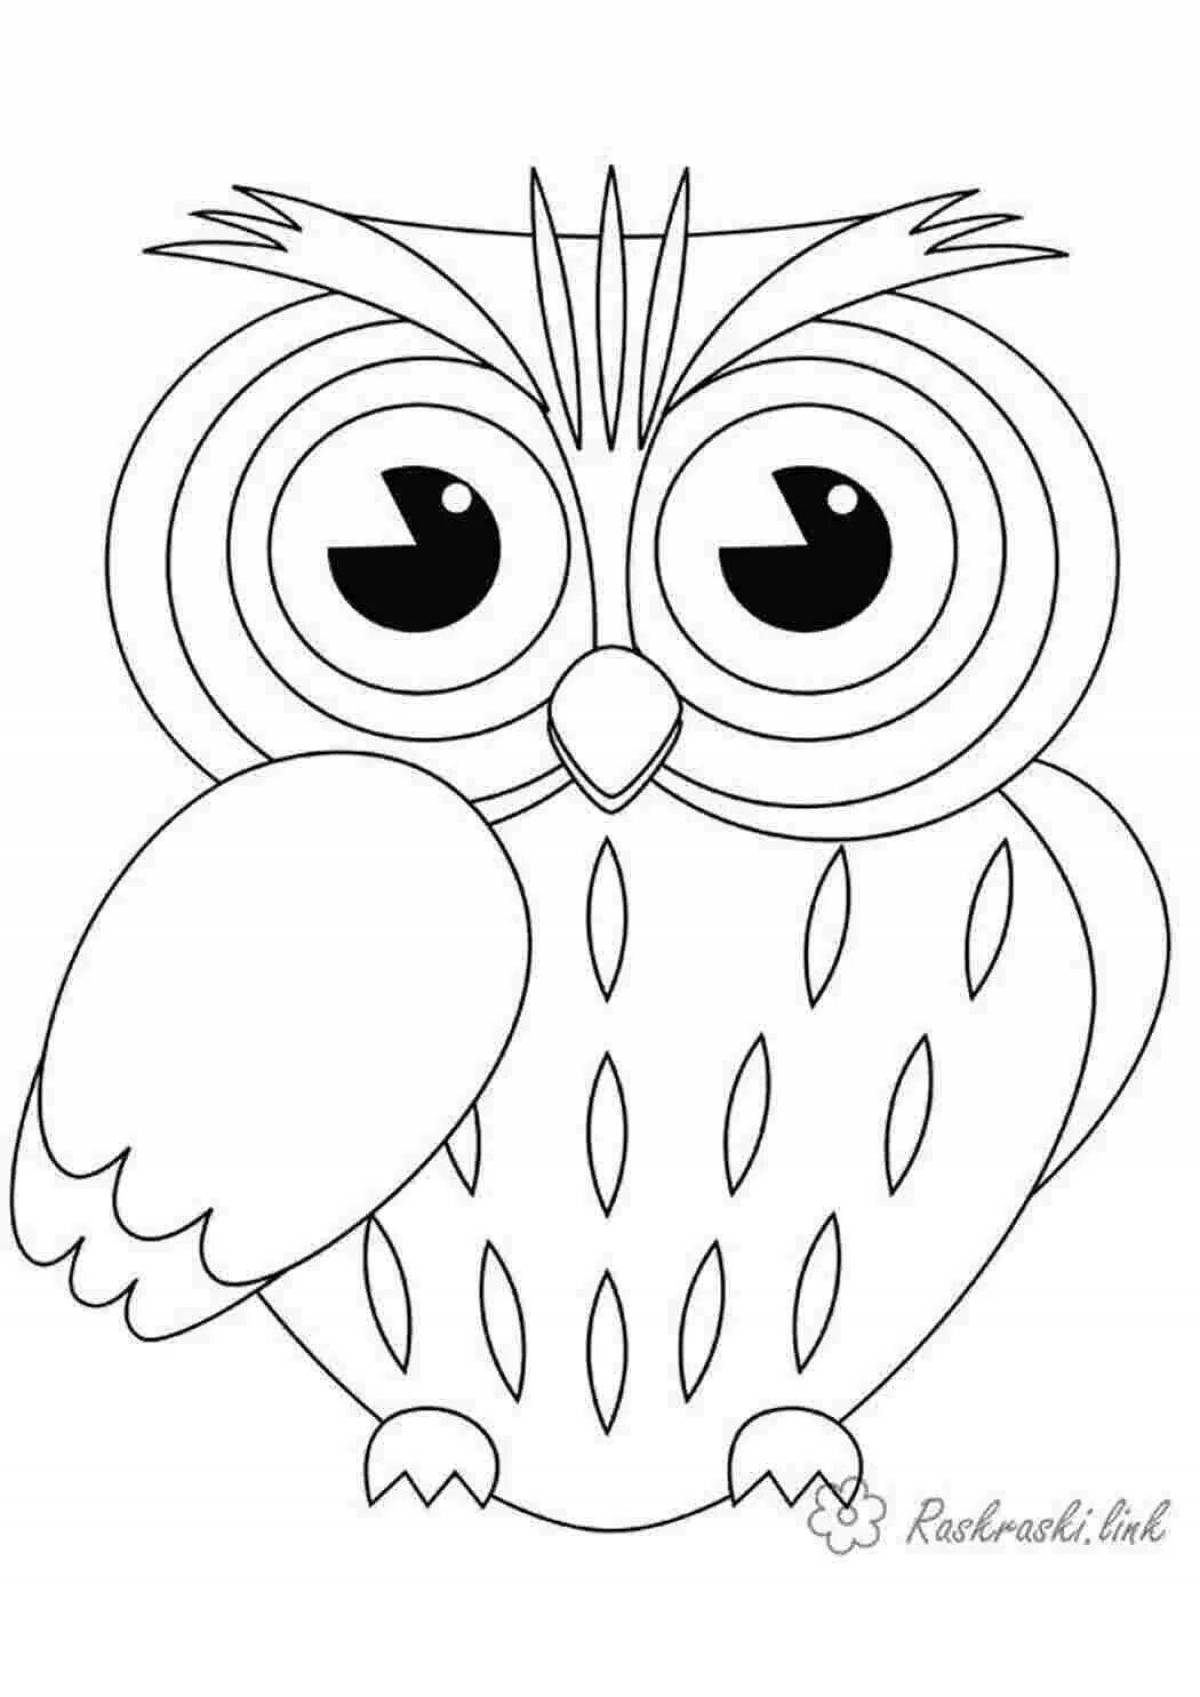 Shiny Owl coloring page